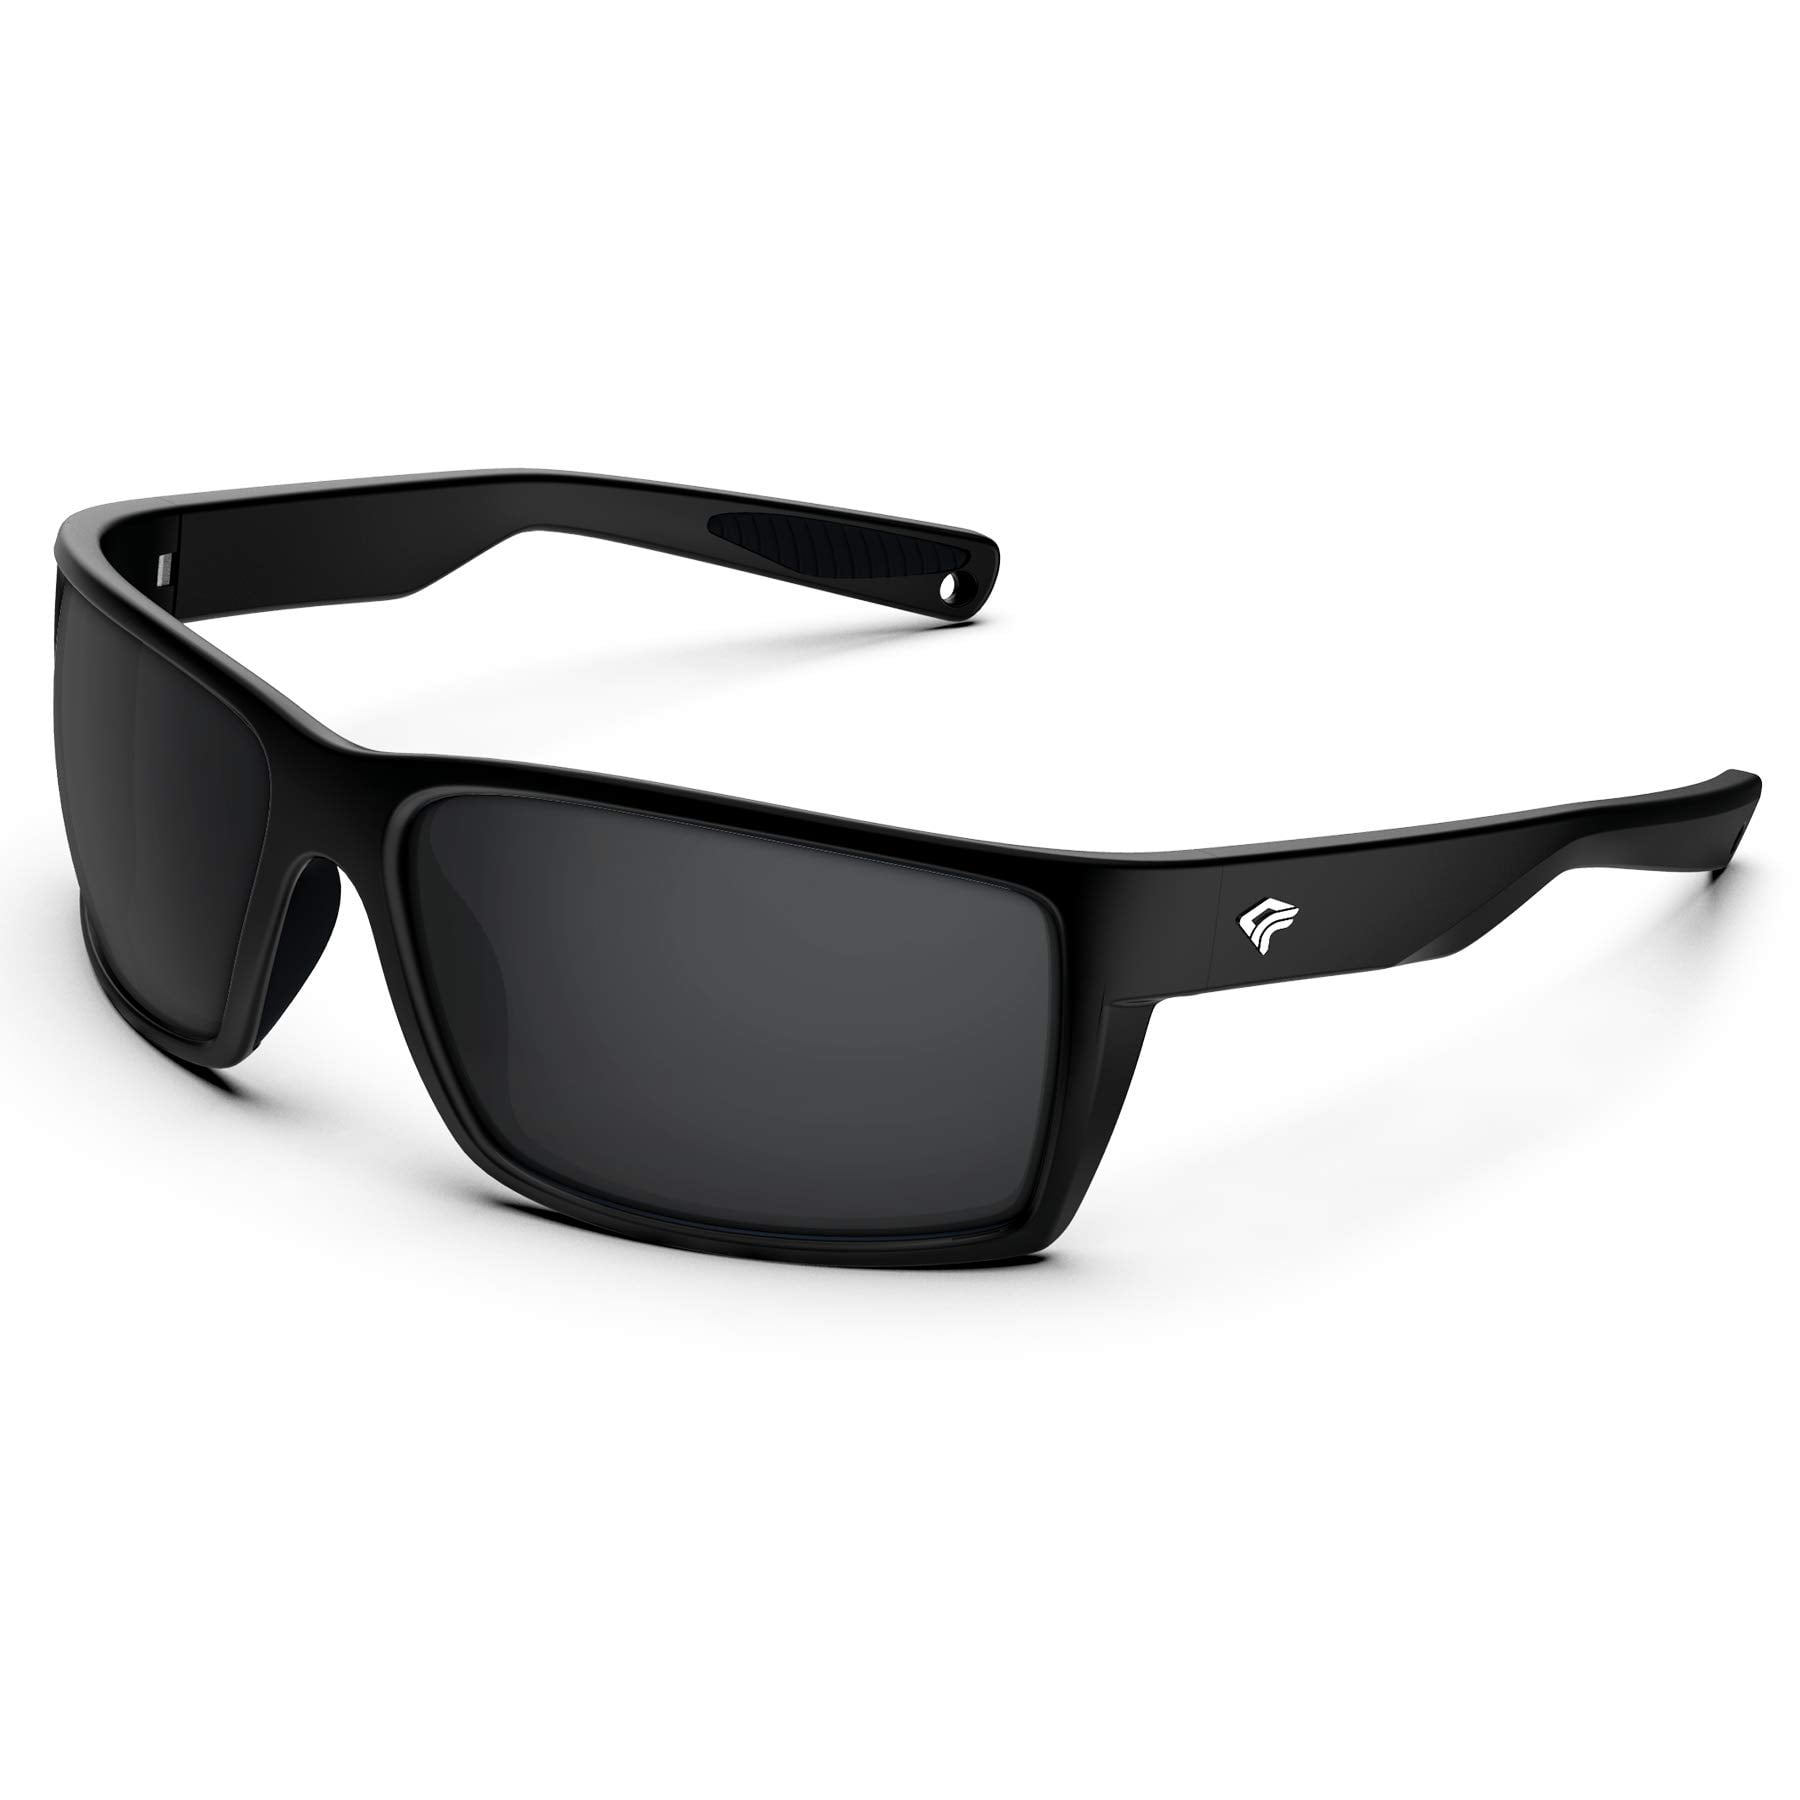 Torege 'Tension' Sports Polarized Sunglasses for Men and Women - Lifetime Warranty - Perfect for Fishing, Boating, Beach, Golf, Surf & Driving